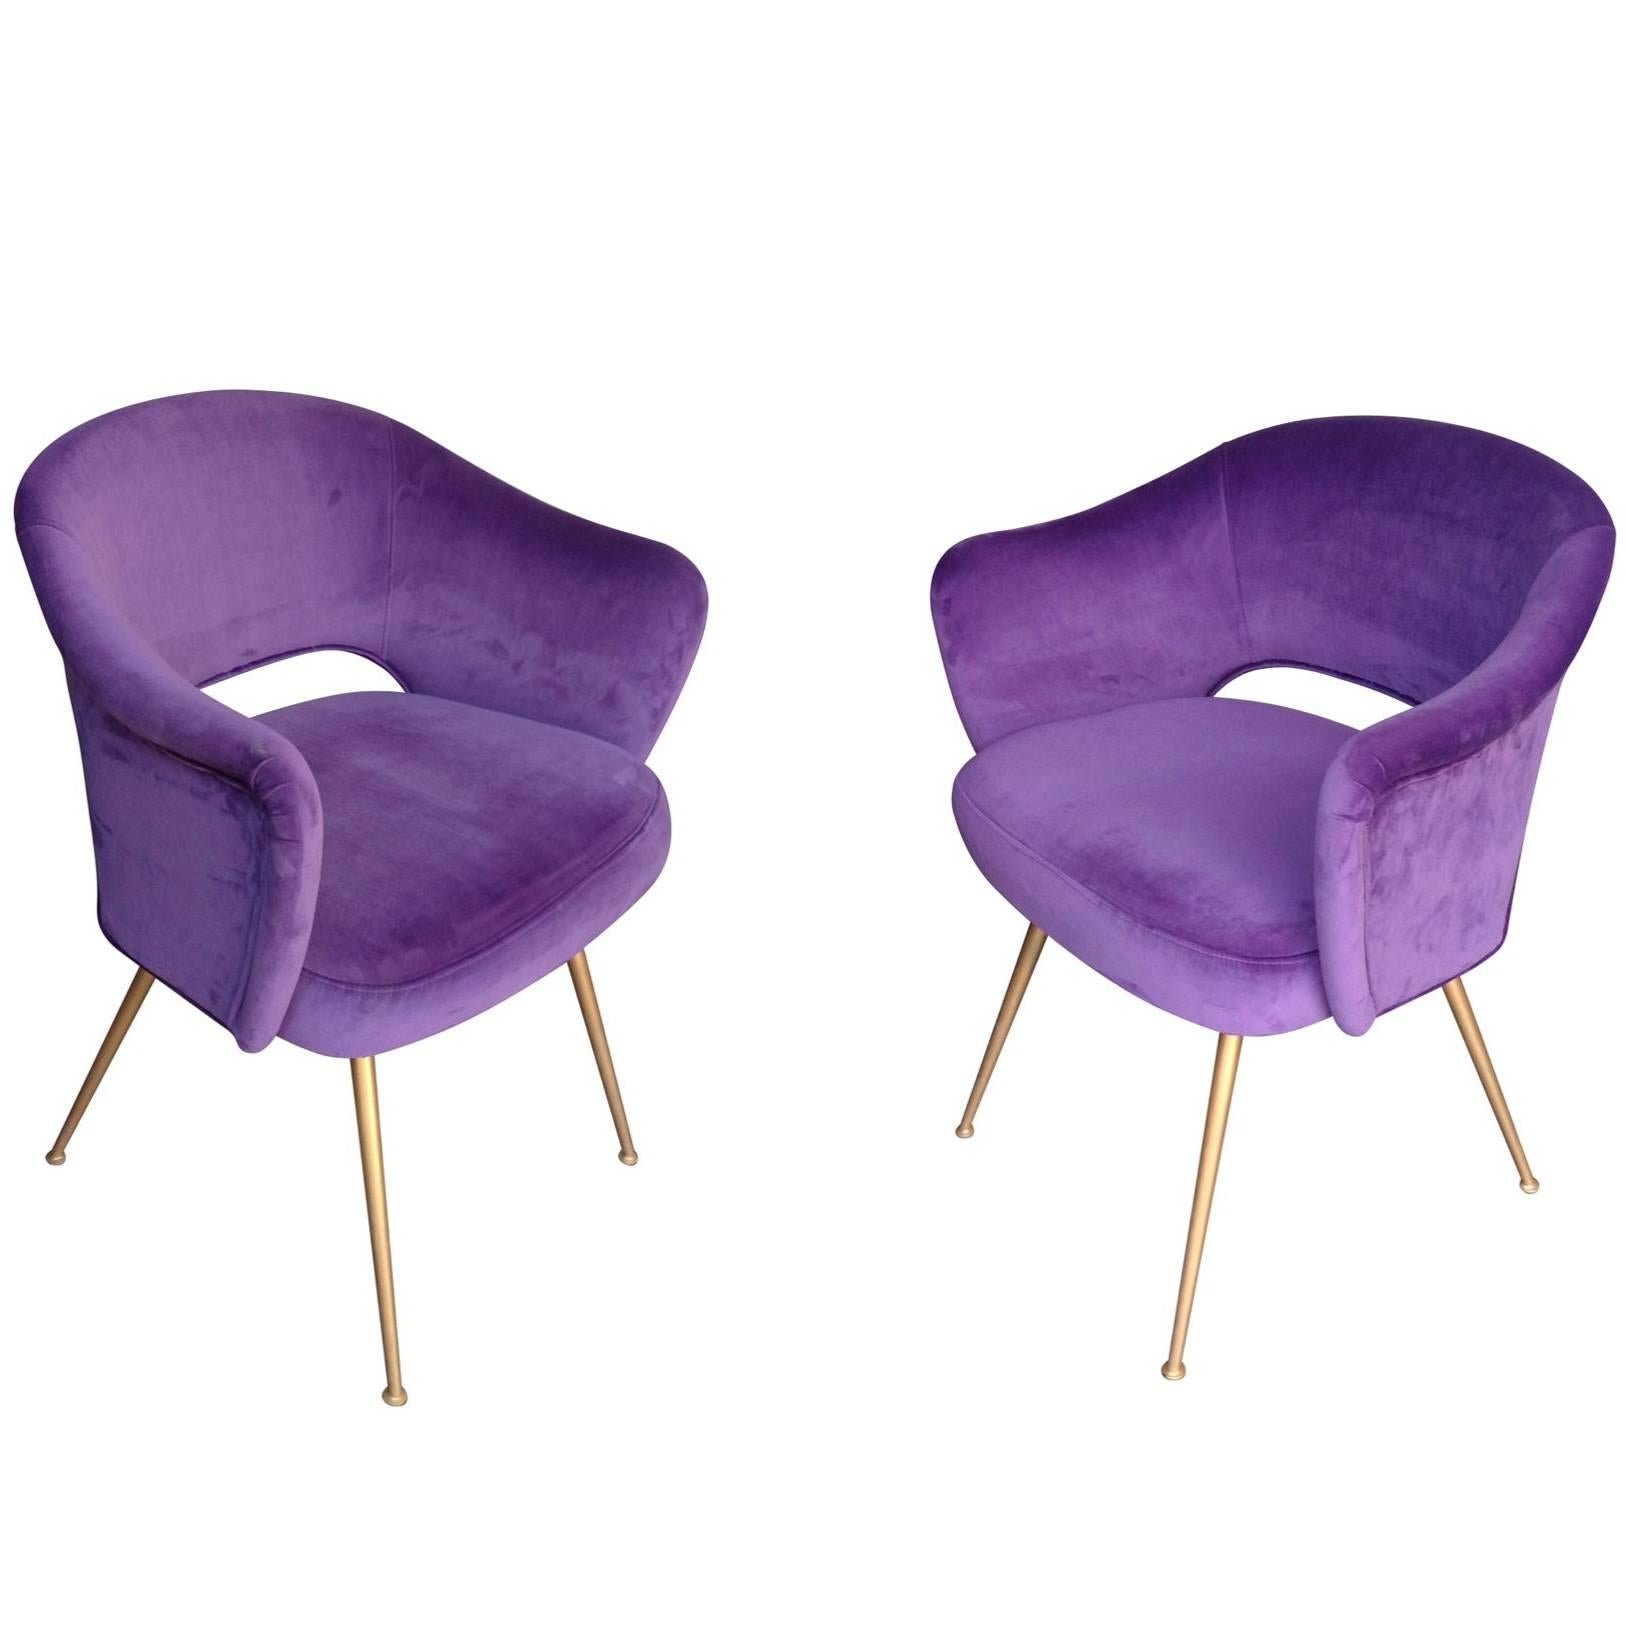 Pair of Italian Cocktail Chairs